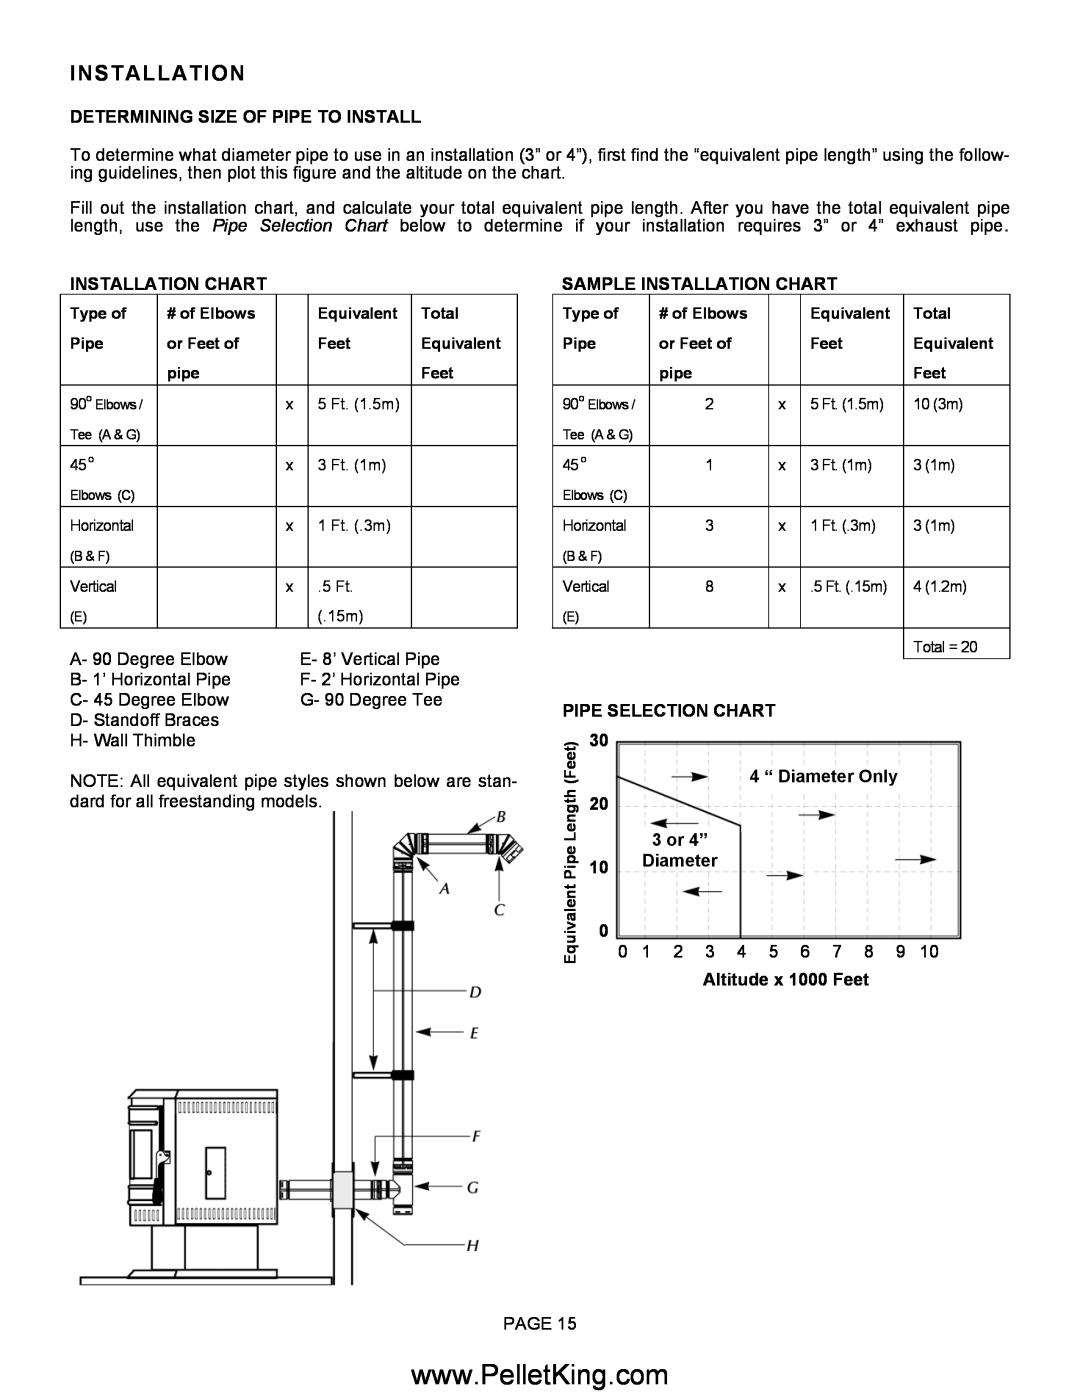 Lennox Hearth II-T C FS Determining Size Of Pipe To Install, Sample Installation Chart, Pipe Selection Chart, 3 or 4” 